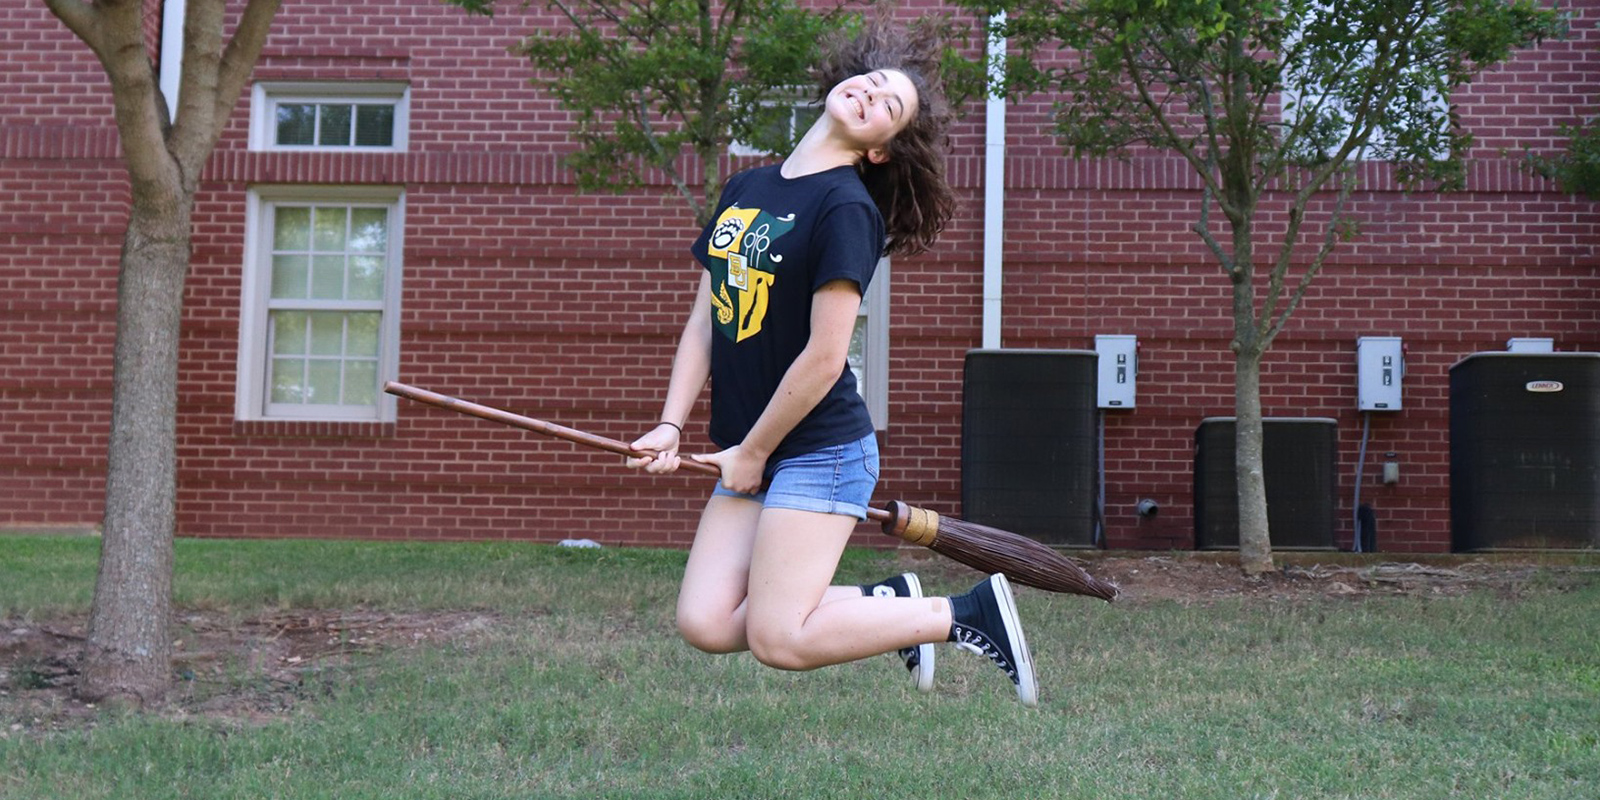 A Baylor student "flying" on her quidditch broom